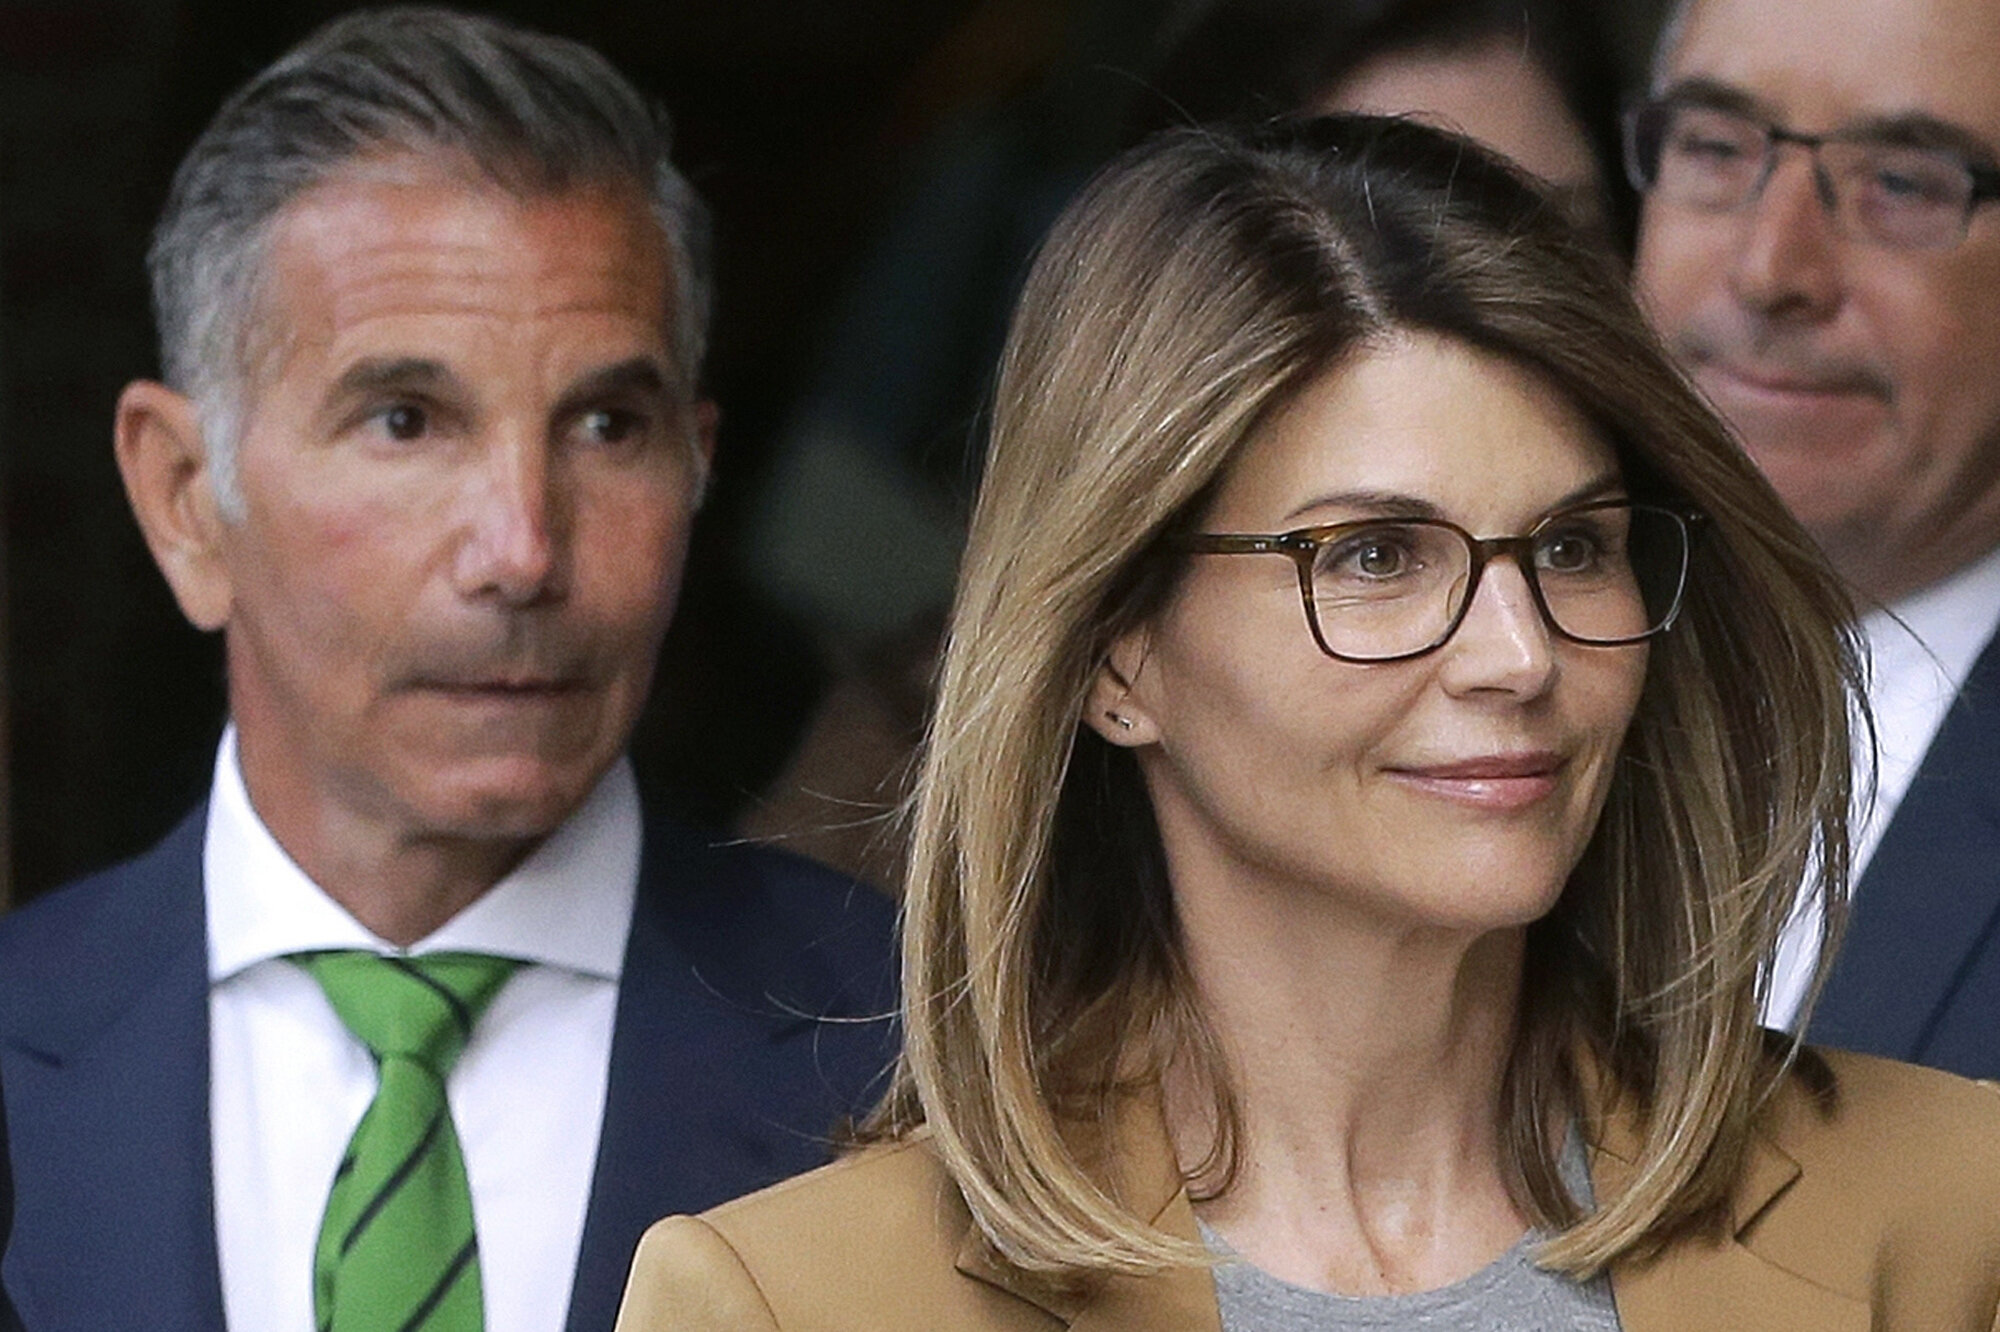 In this April 3, 2019 file photo, actor Lori Loughlin, front, and husband, clothing designer Mossimo Giannulli, left, depart federal court in Boston after facing charges in a nationwide college admissions bribery scandal. Loughlin was released from …